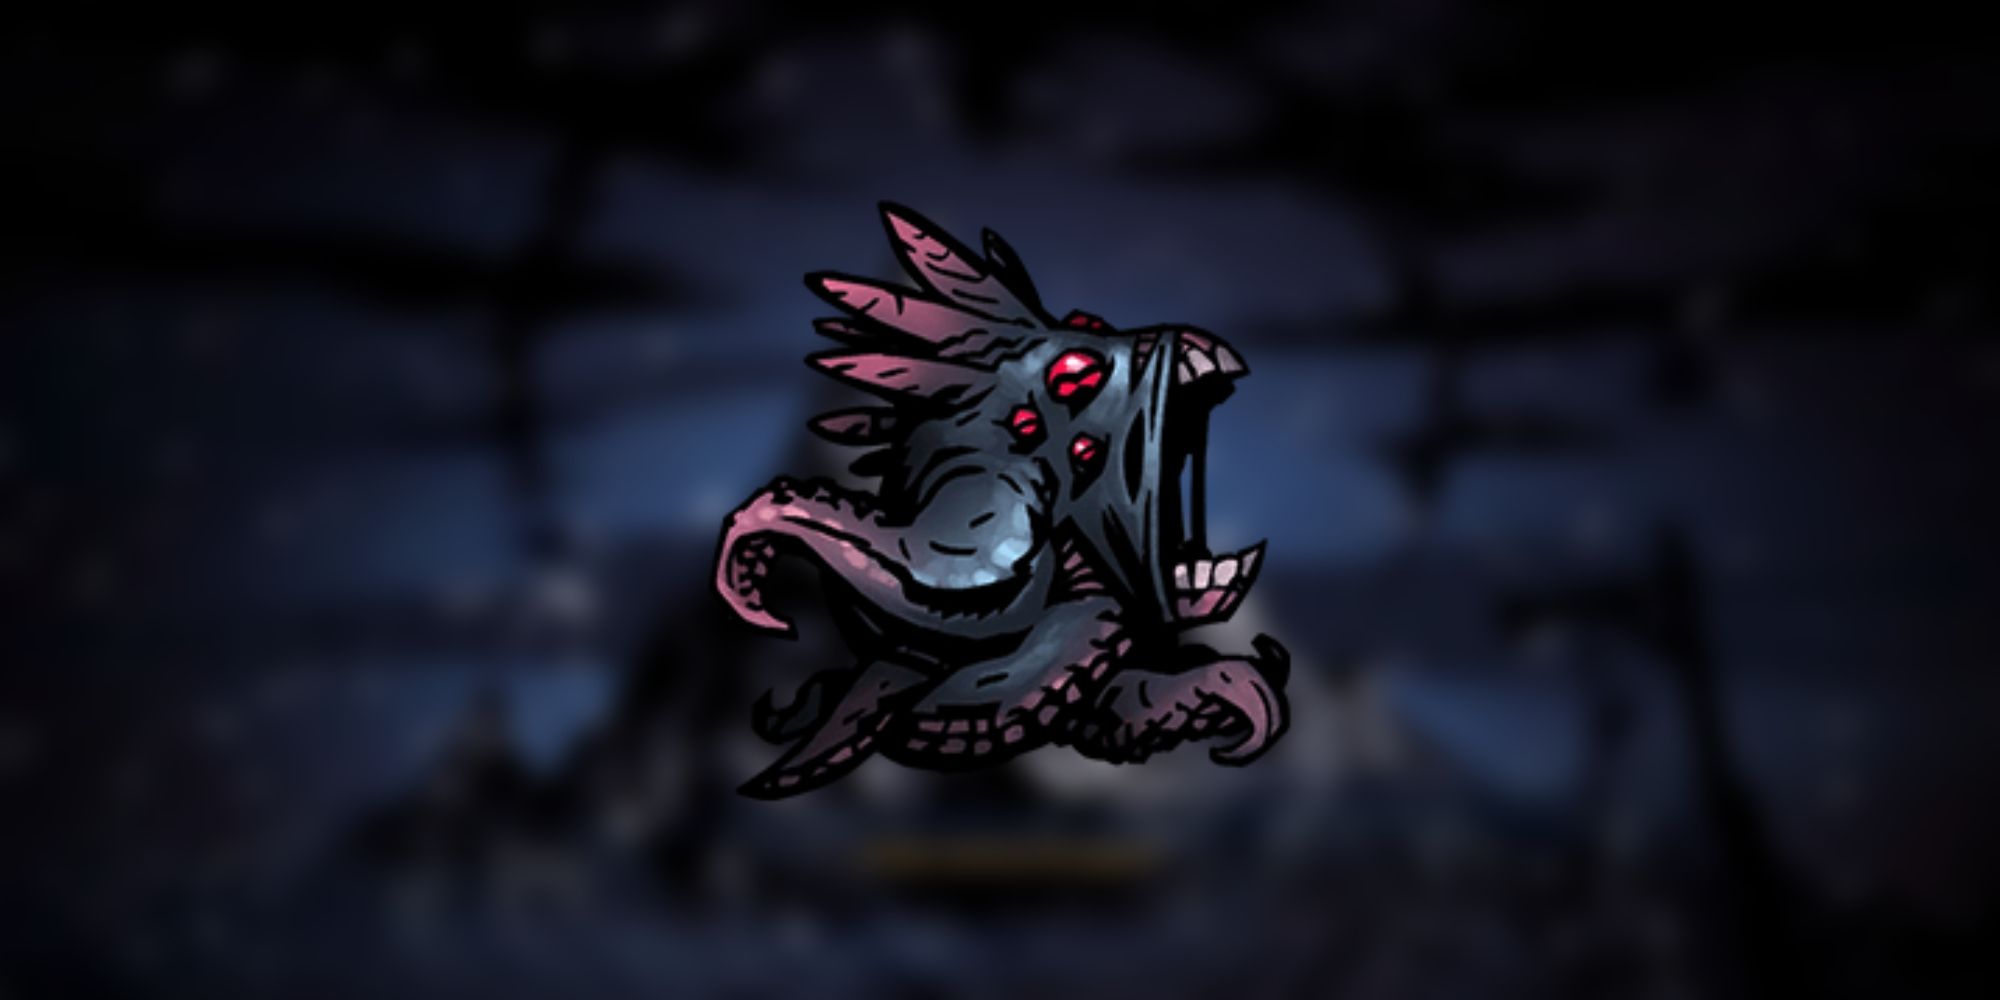 An image of the Shambler's Spawn Pet from Darkest Dungeon 2